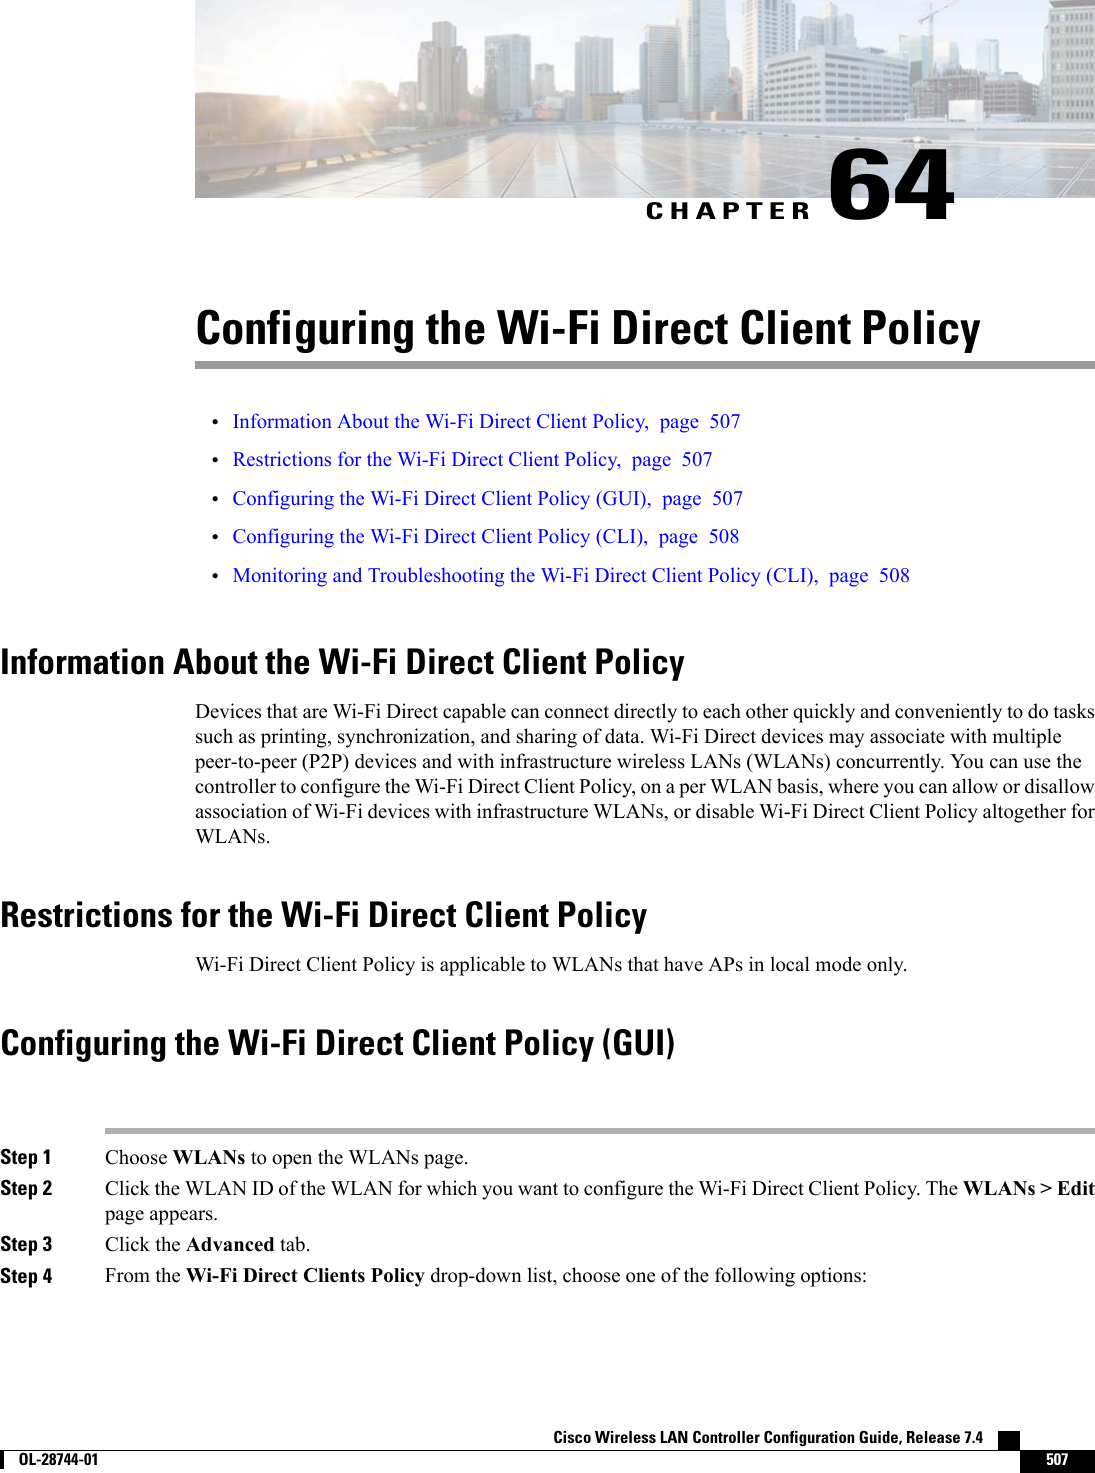 CHAPTER 64Configuring the Wi-Fi Direct Client Policy•Information About the Wi-Fi Direct Client Policy, page 507•Restrictions for the Wi-Fi Direct Client Policy, page 507•Configuring the Wi-Fi Direct Client Policy (GUI), page 507•Configuring the Wi-Fi Direct Client Policy (CLI), page 508•Monitoring and Troubleshooting the Wi-Fi Direct Client Policy (CLI), page 508Information About the Wi-Fi Direct Client PolicyDevices that are Wi-Fi Direct capable can connect directly to each other quickly and conveniently to do taskssuch as printing, synchronization, and sharing of data. Wi-Fi Direct devices may associate with multiplepeer-to-peer (P2P) devices and with infrastructure wireless LANs (WLANs) concurrently. You can use thecontroller to configure the Wi-Fi Direct Client Policy, on a per WLAN basis, where you can allow or disallowassociation of Wi-Fi devices with infrastructure WLANs, or disable Wi-Fi Direct Client Policy altogether forWLANs.Restrictions for the Wi-Fi Direct Client PolicyWi-Fi Direct Client Policy is applicable to WLANs that have APs in local mode only.Configuring the Wi-Fi Direct Client Policy (GUI)Step 1 Choose WLANs to open the WLANs page.Step 2 Click the WLAN ID of the WLAN for which you want to configure the Wi-Fi Direct Client Policy. The WLANs &gt; Editpage appears.Step 3 Click the Advanced tab.Step 4 From the Wi-Fi Direct Clients Policy drop-down list, choose one of the following options:Cisco Wireless LAN Controller Configuration Guide, Release 7.4        OL-28744-01 507